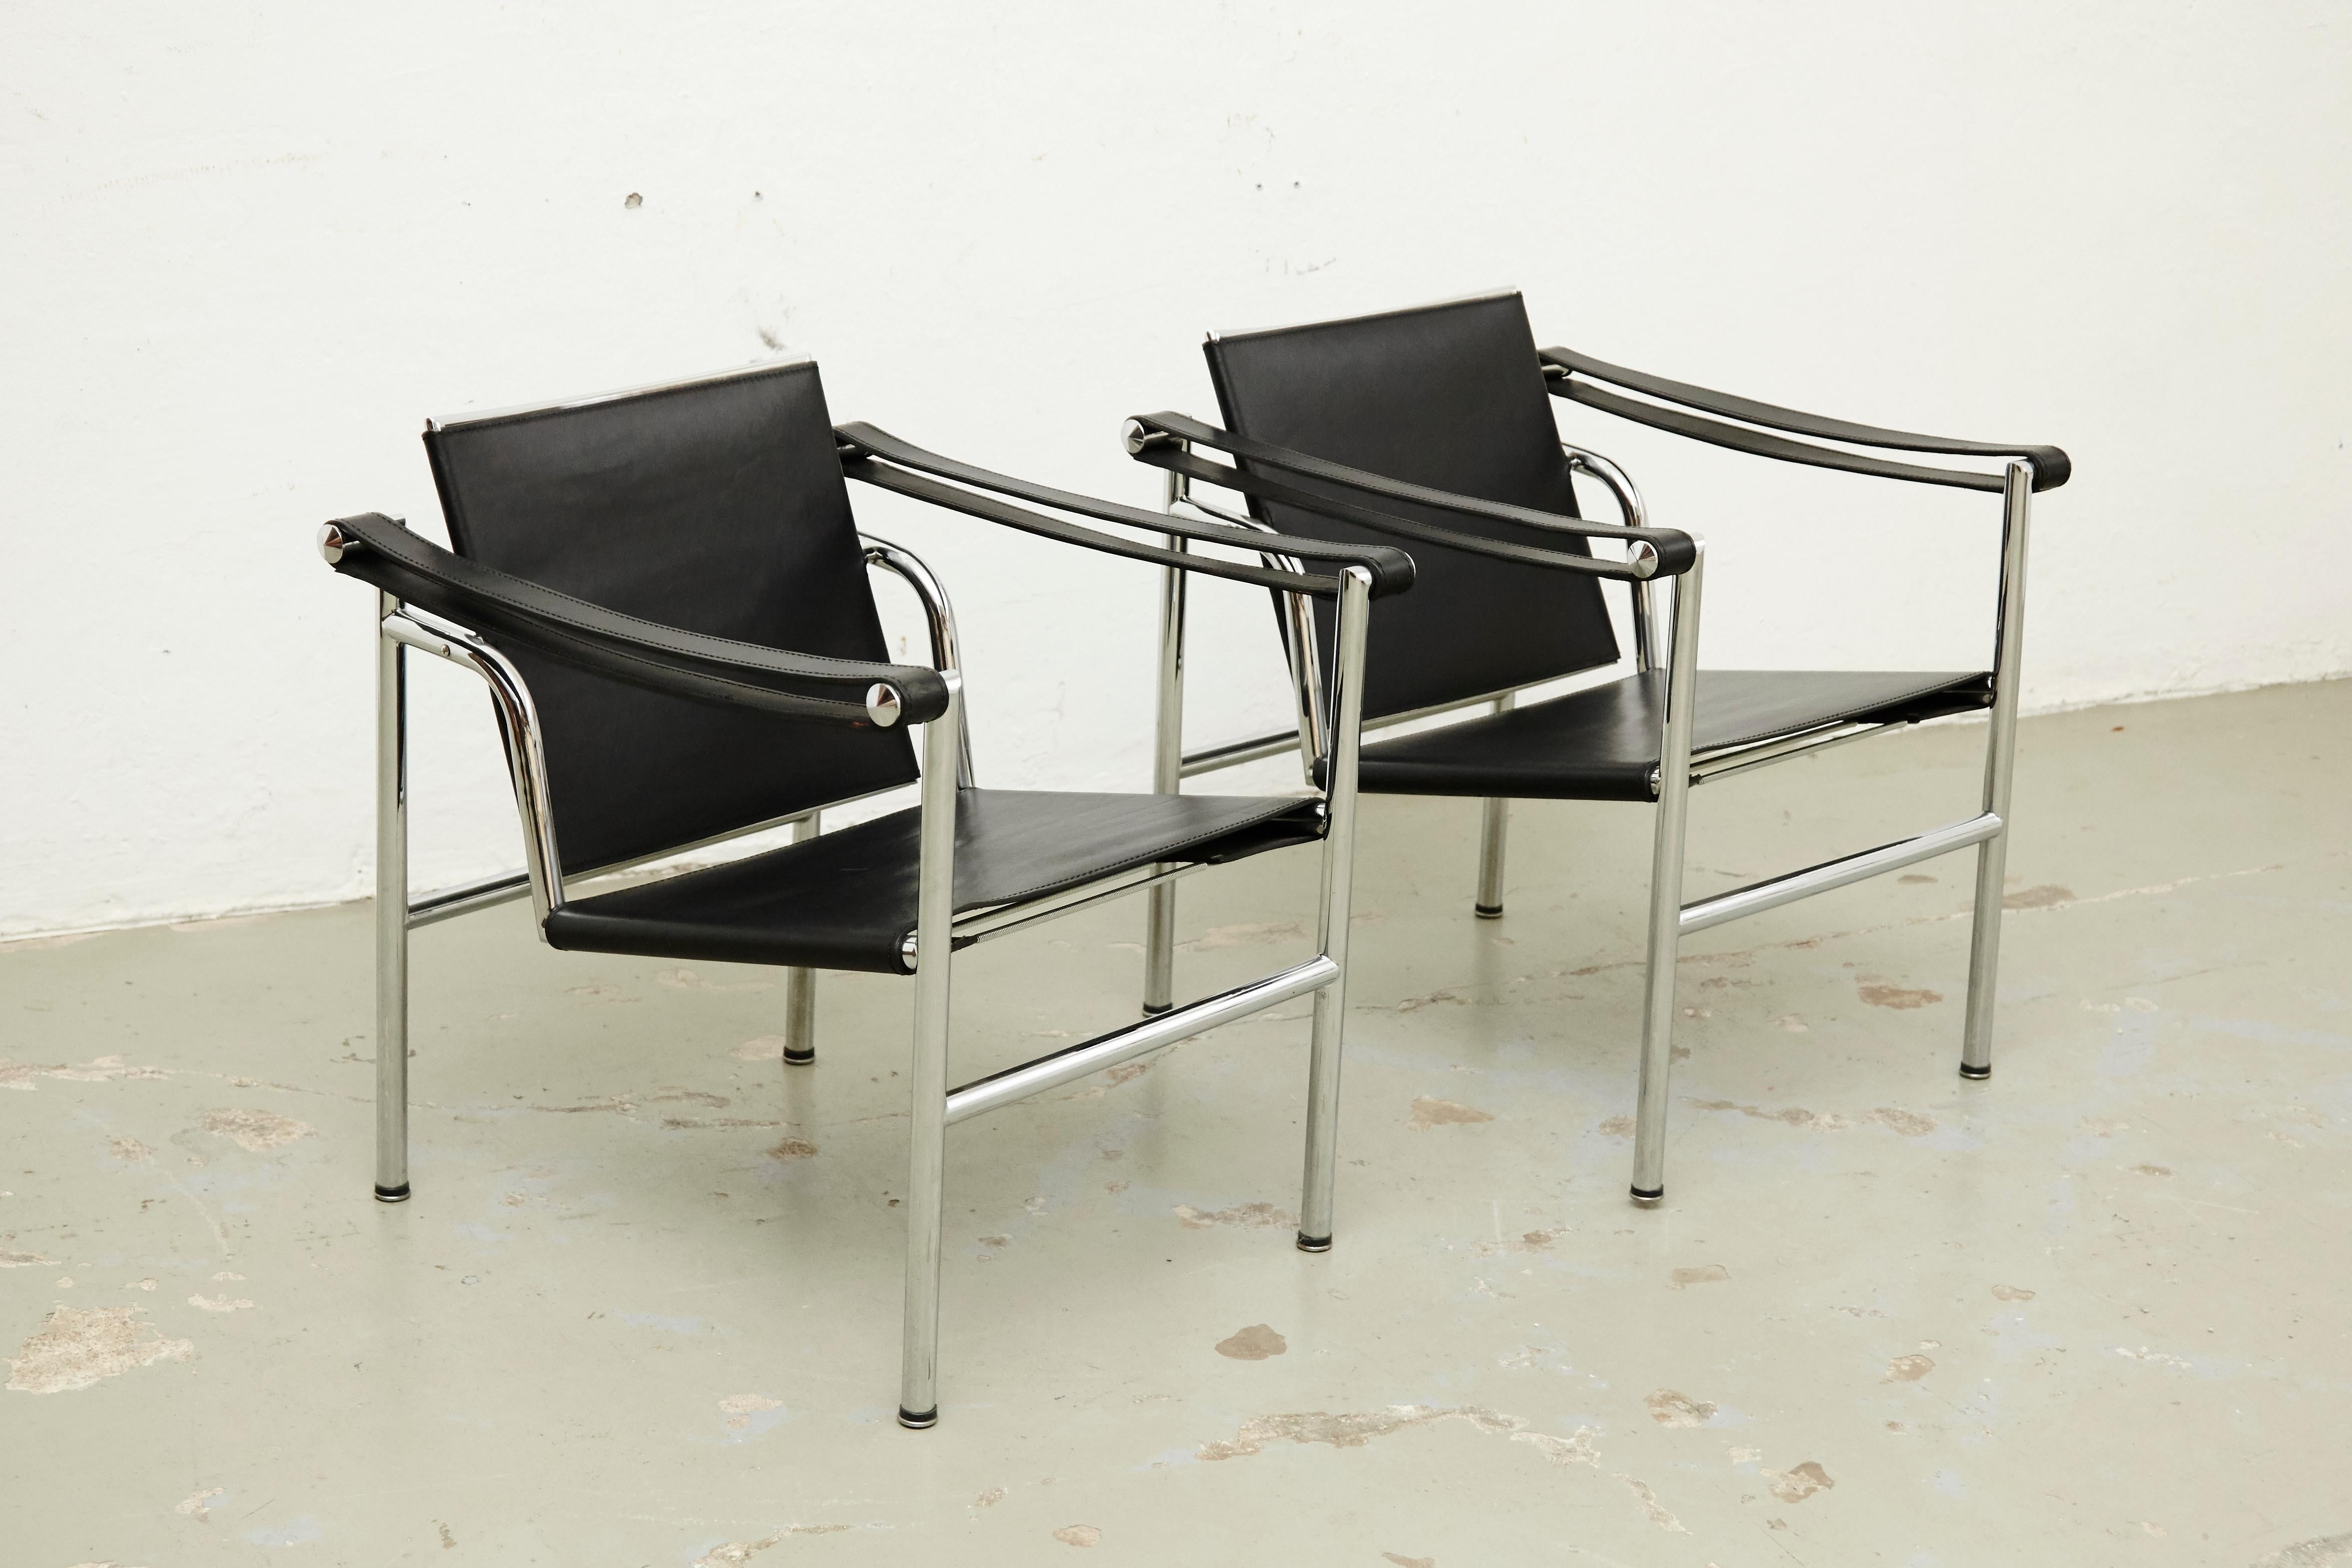 Le Corbusier, Pierre Jeanneret and Charlotte Perriand LC1 black leather lounge chair
chromed steel.
By unknown manufacturer.
Manufactured, circa 1970.

In good original condition with minor wear consistent of age and use, preserving a beautiful